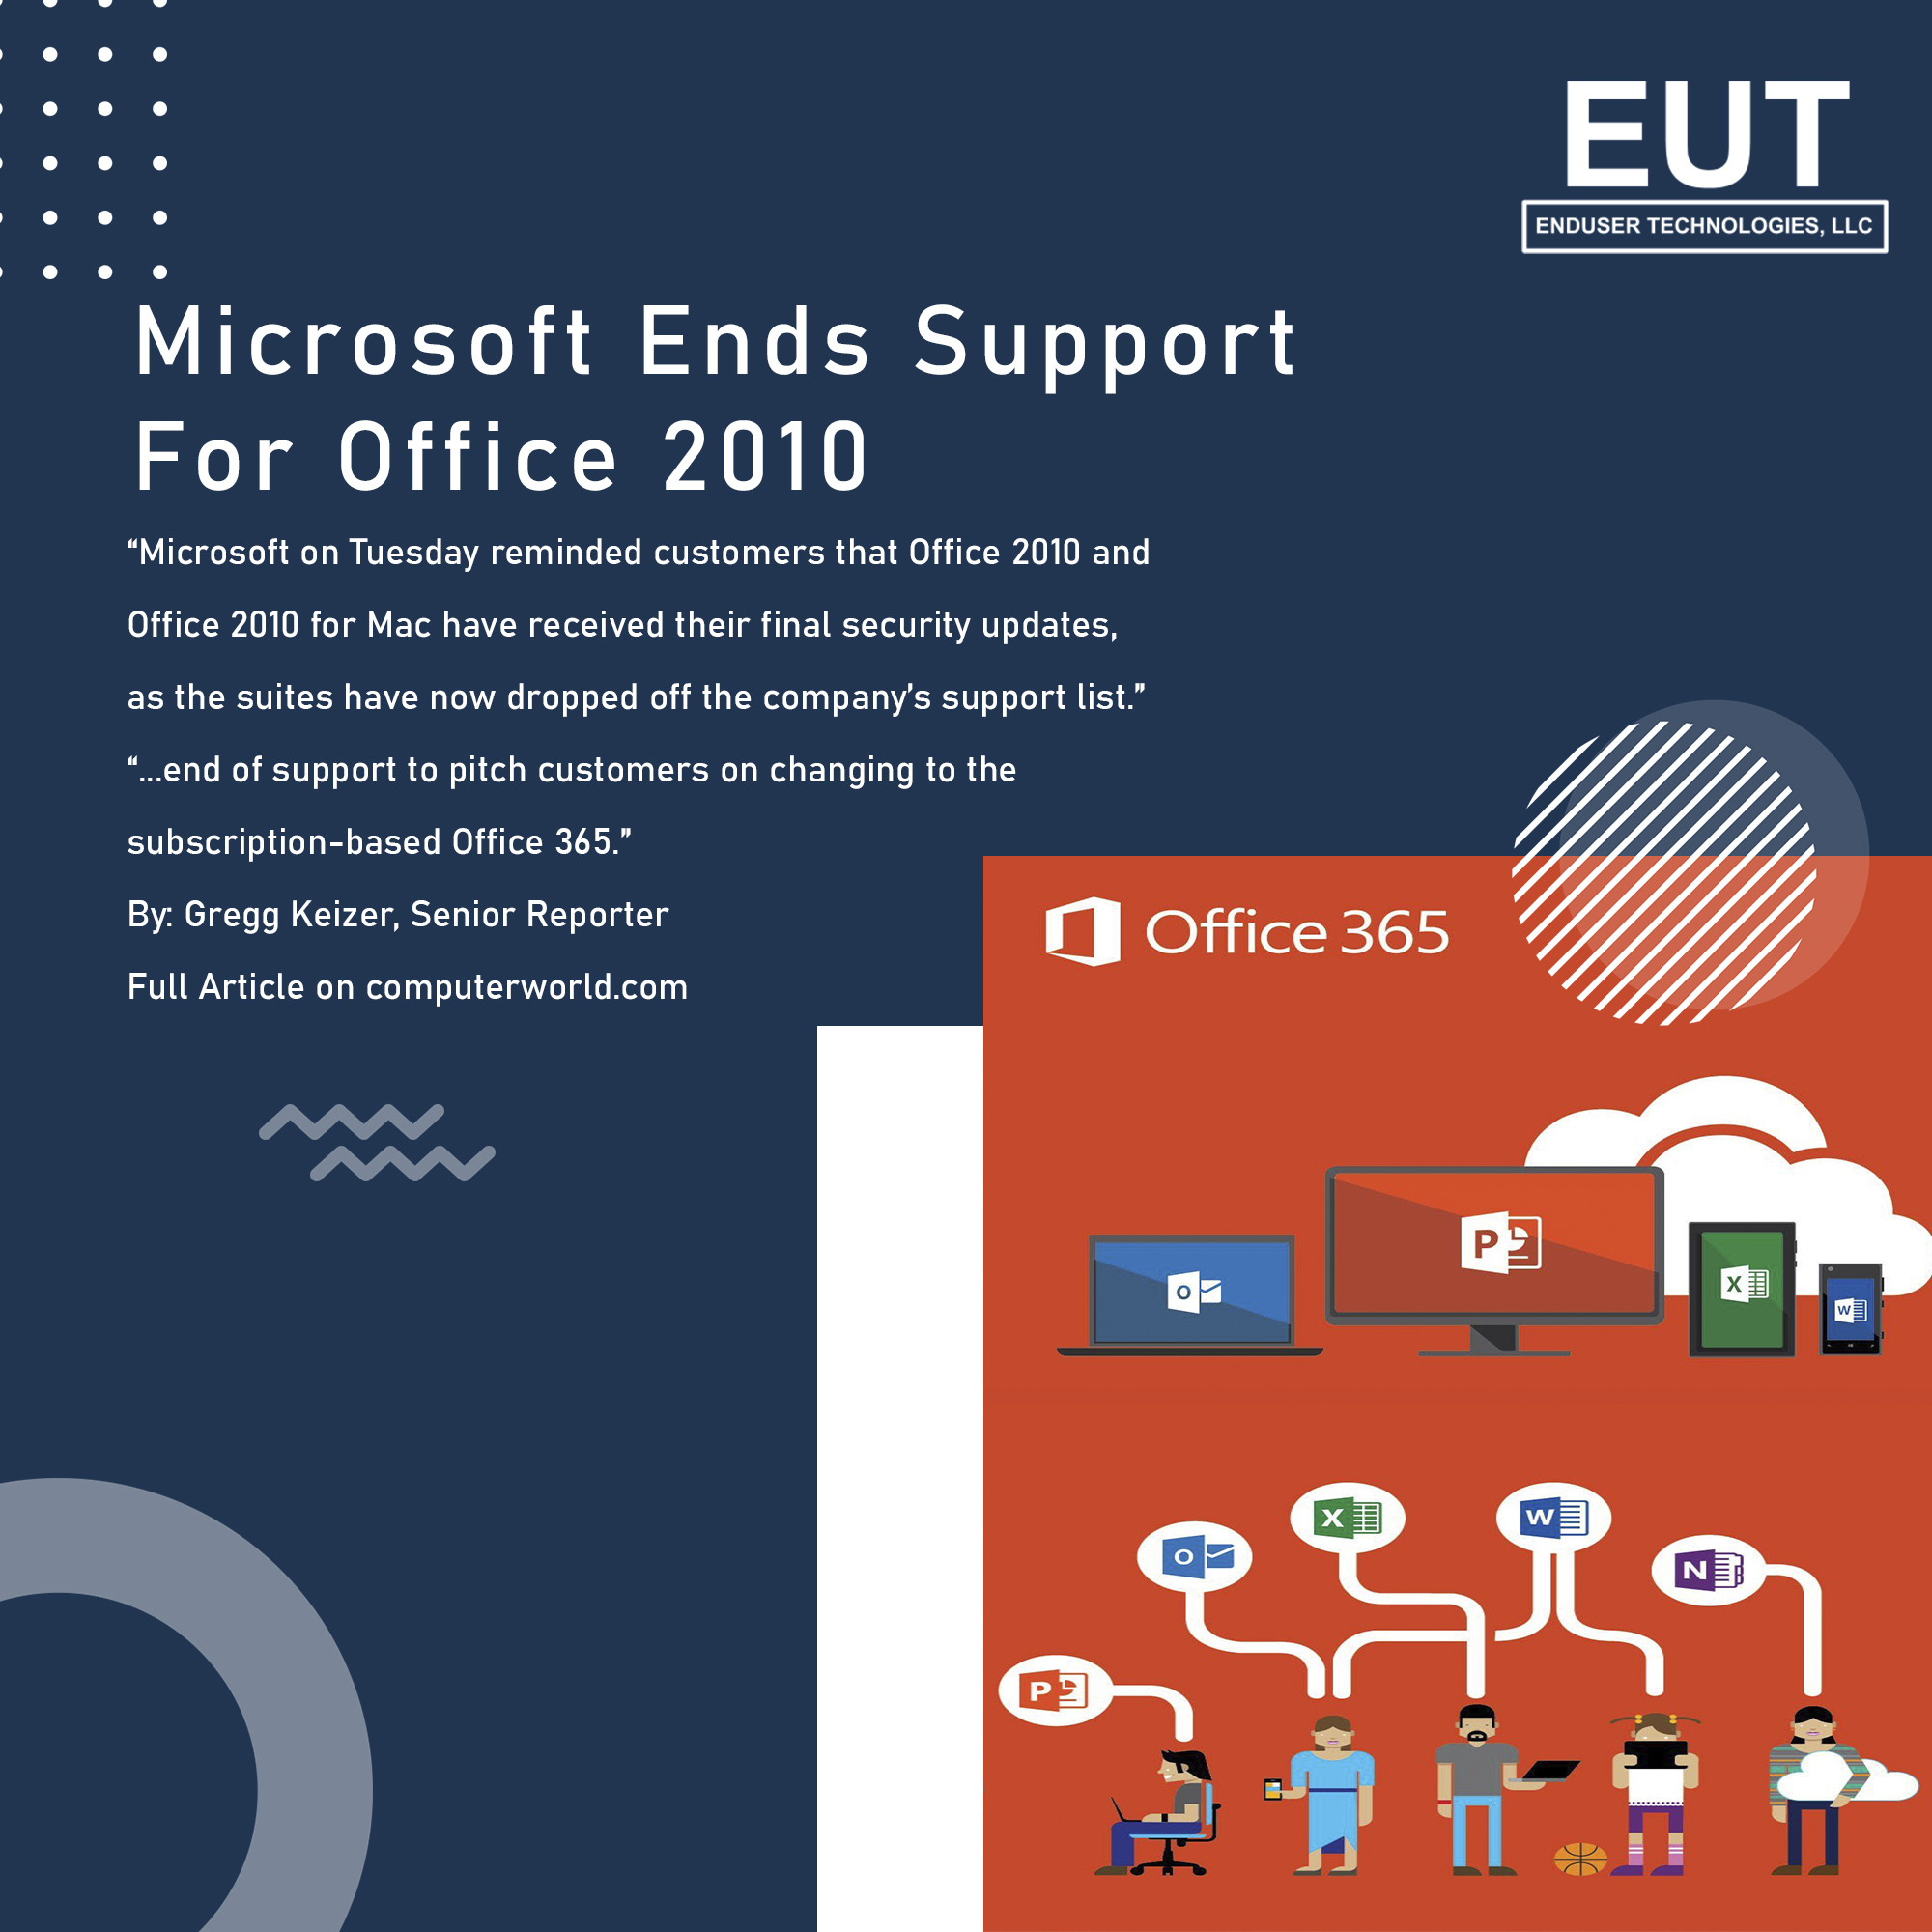 Microsoft ends support for Office 2010